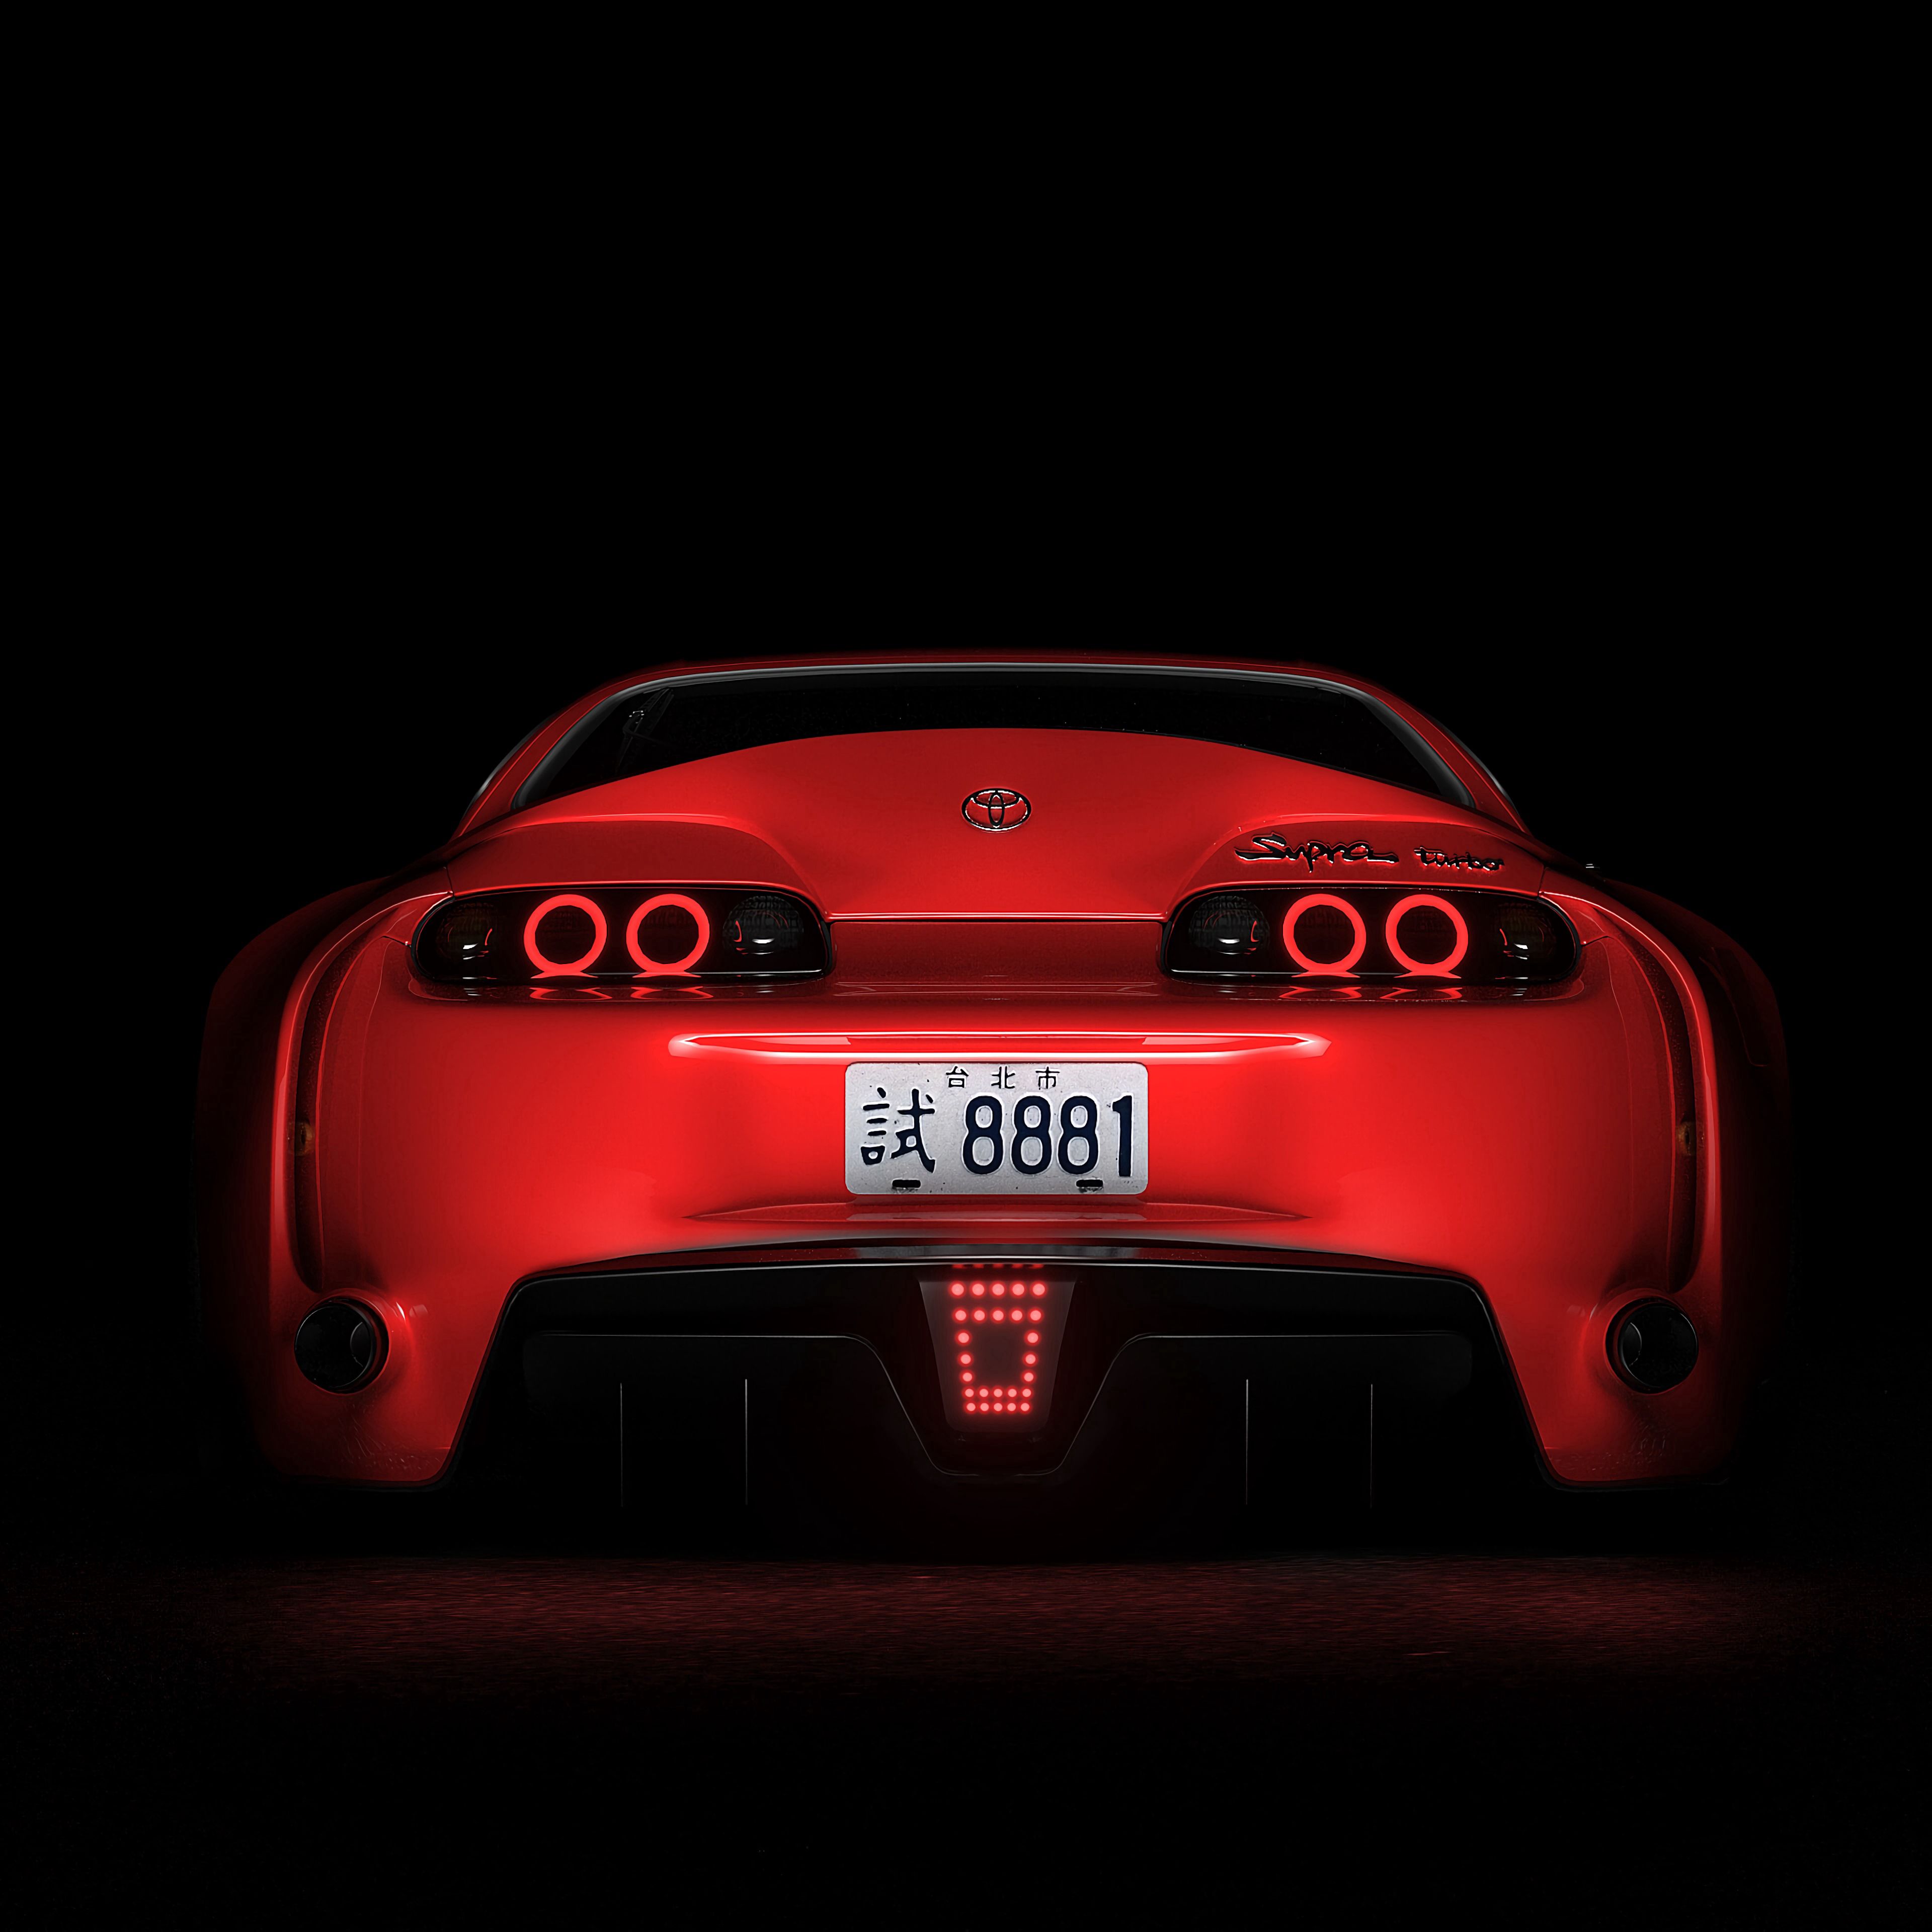 wallpapers backlight, toyota, toyota supra, cars, sports car, dark, sports, red, illumination, back view, rear view